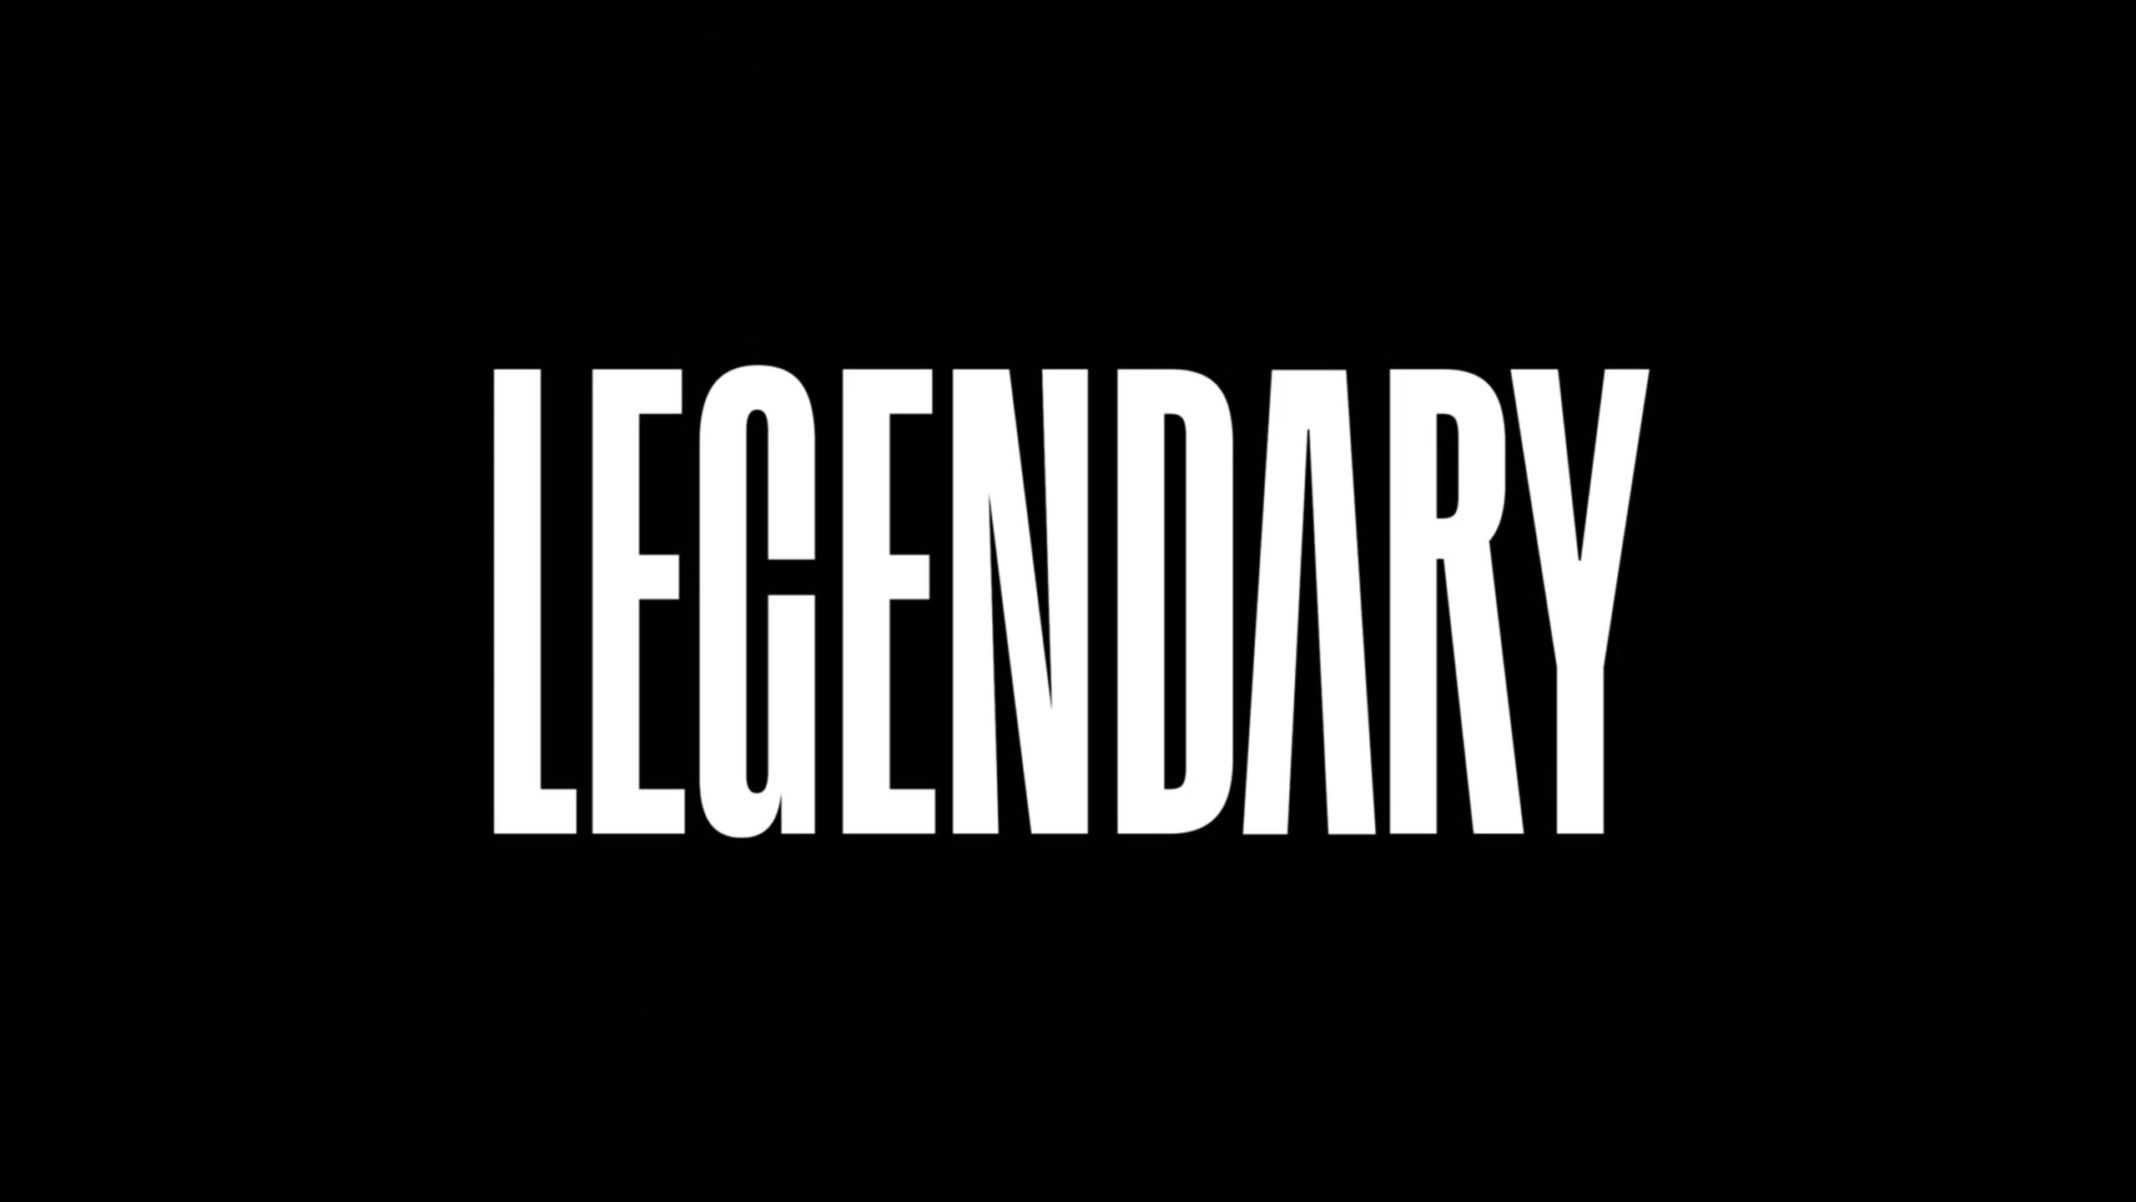 Legendary: Season 1 Episode 1 “Welcome to My House” [Series Premiere] – Recap/ Review with Spoilers